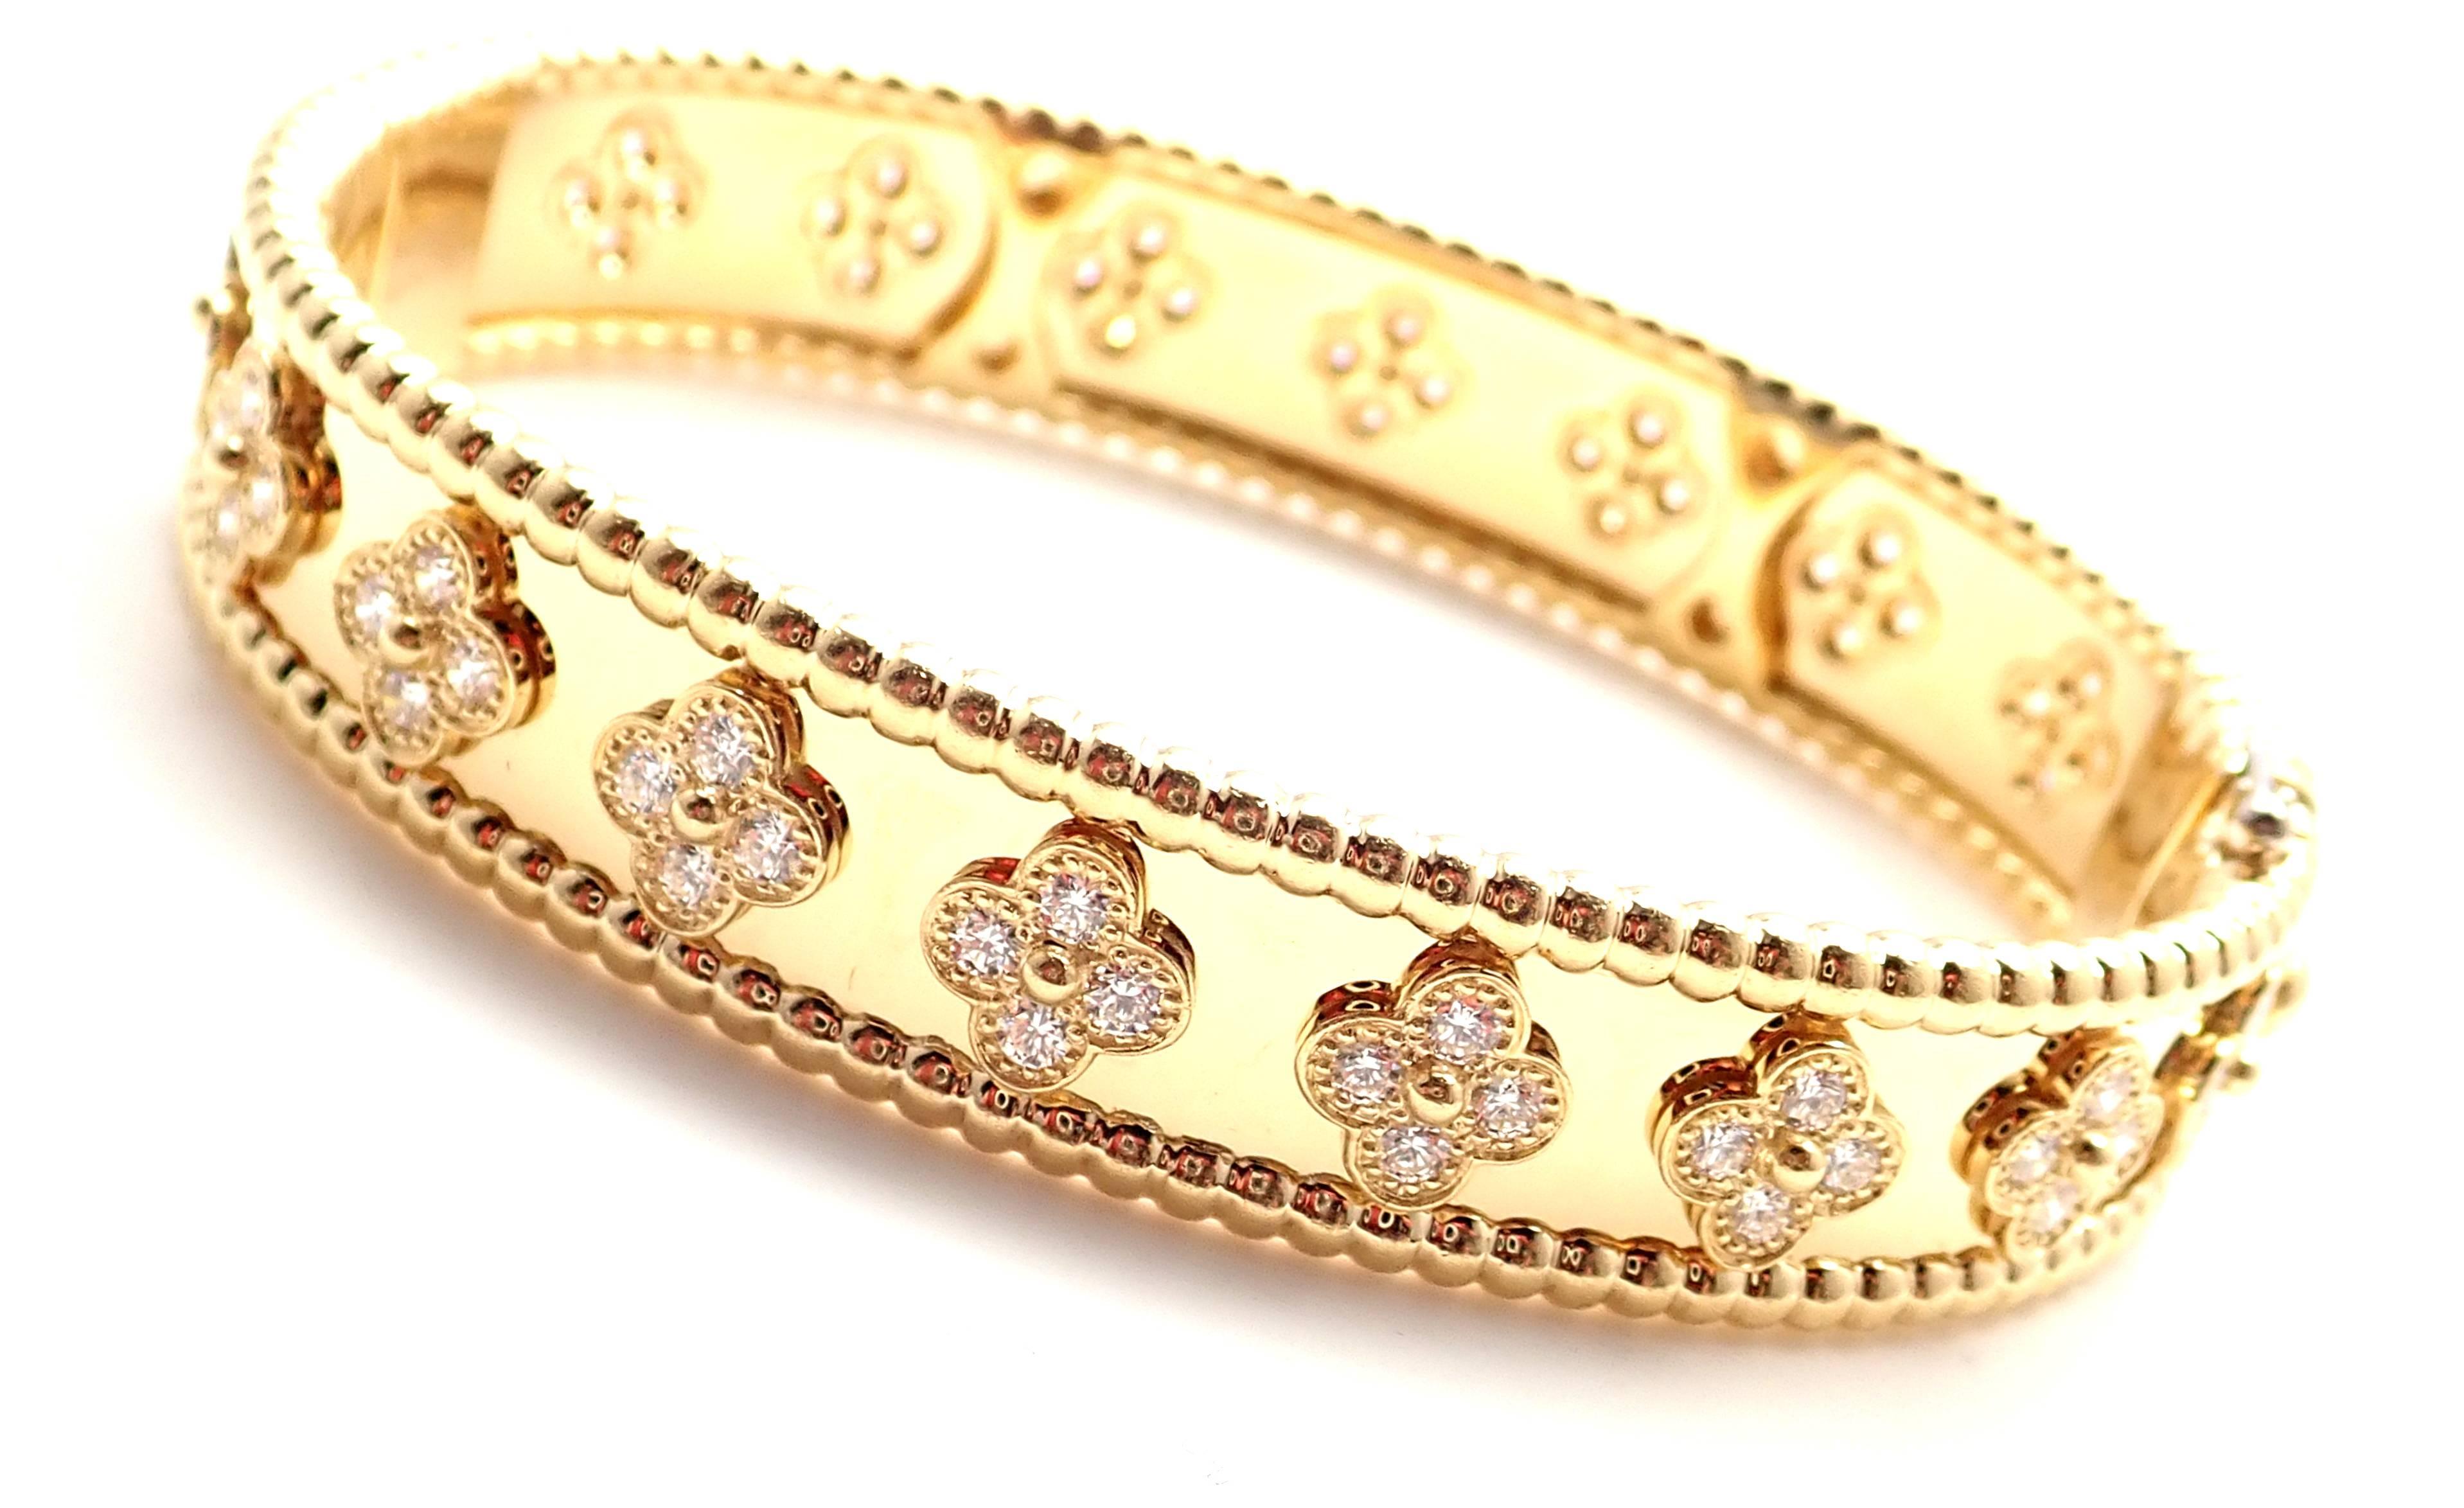 18k Yellow Gold Diamond Clover Perlee Bangle Bracelet by Van Cleef & Arpels.  
With 72 brilliant round cut diamond VVS1 clarity, E color
Total weight approx. 1.60ct
This bracelet comes with Van Cleef & Arpels service paper from VCA store in Japan